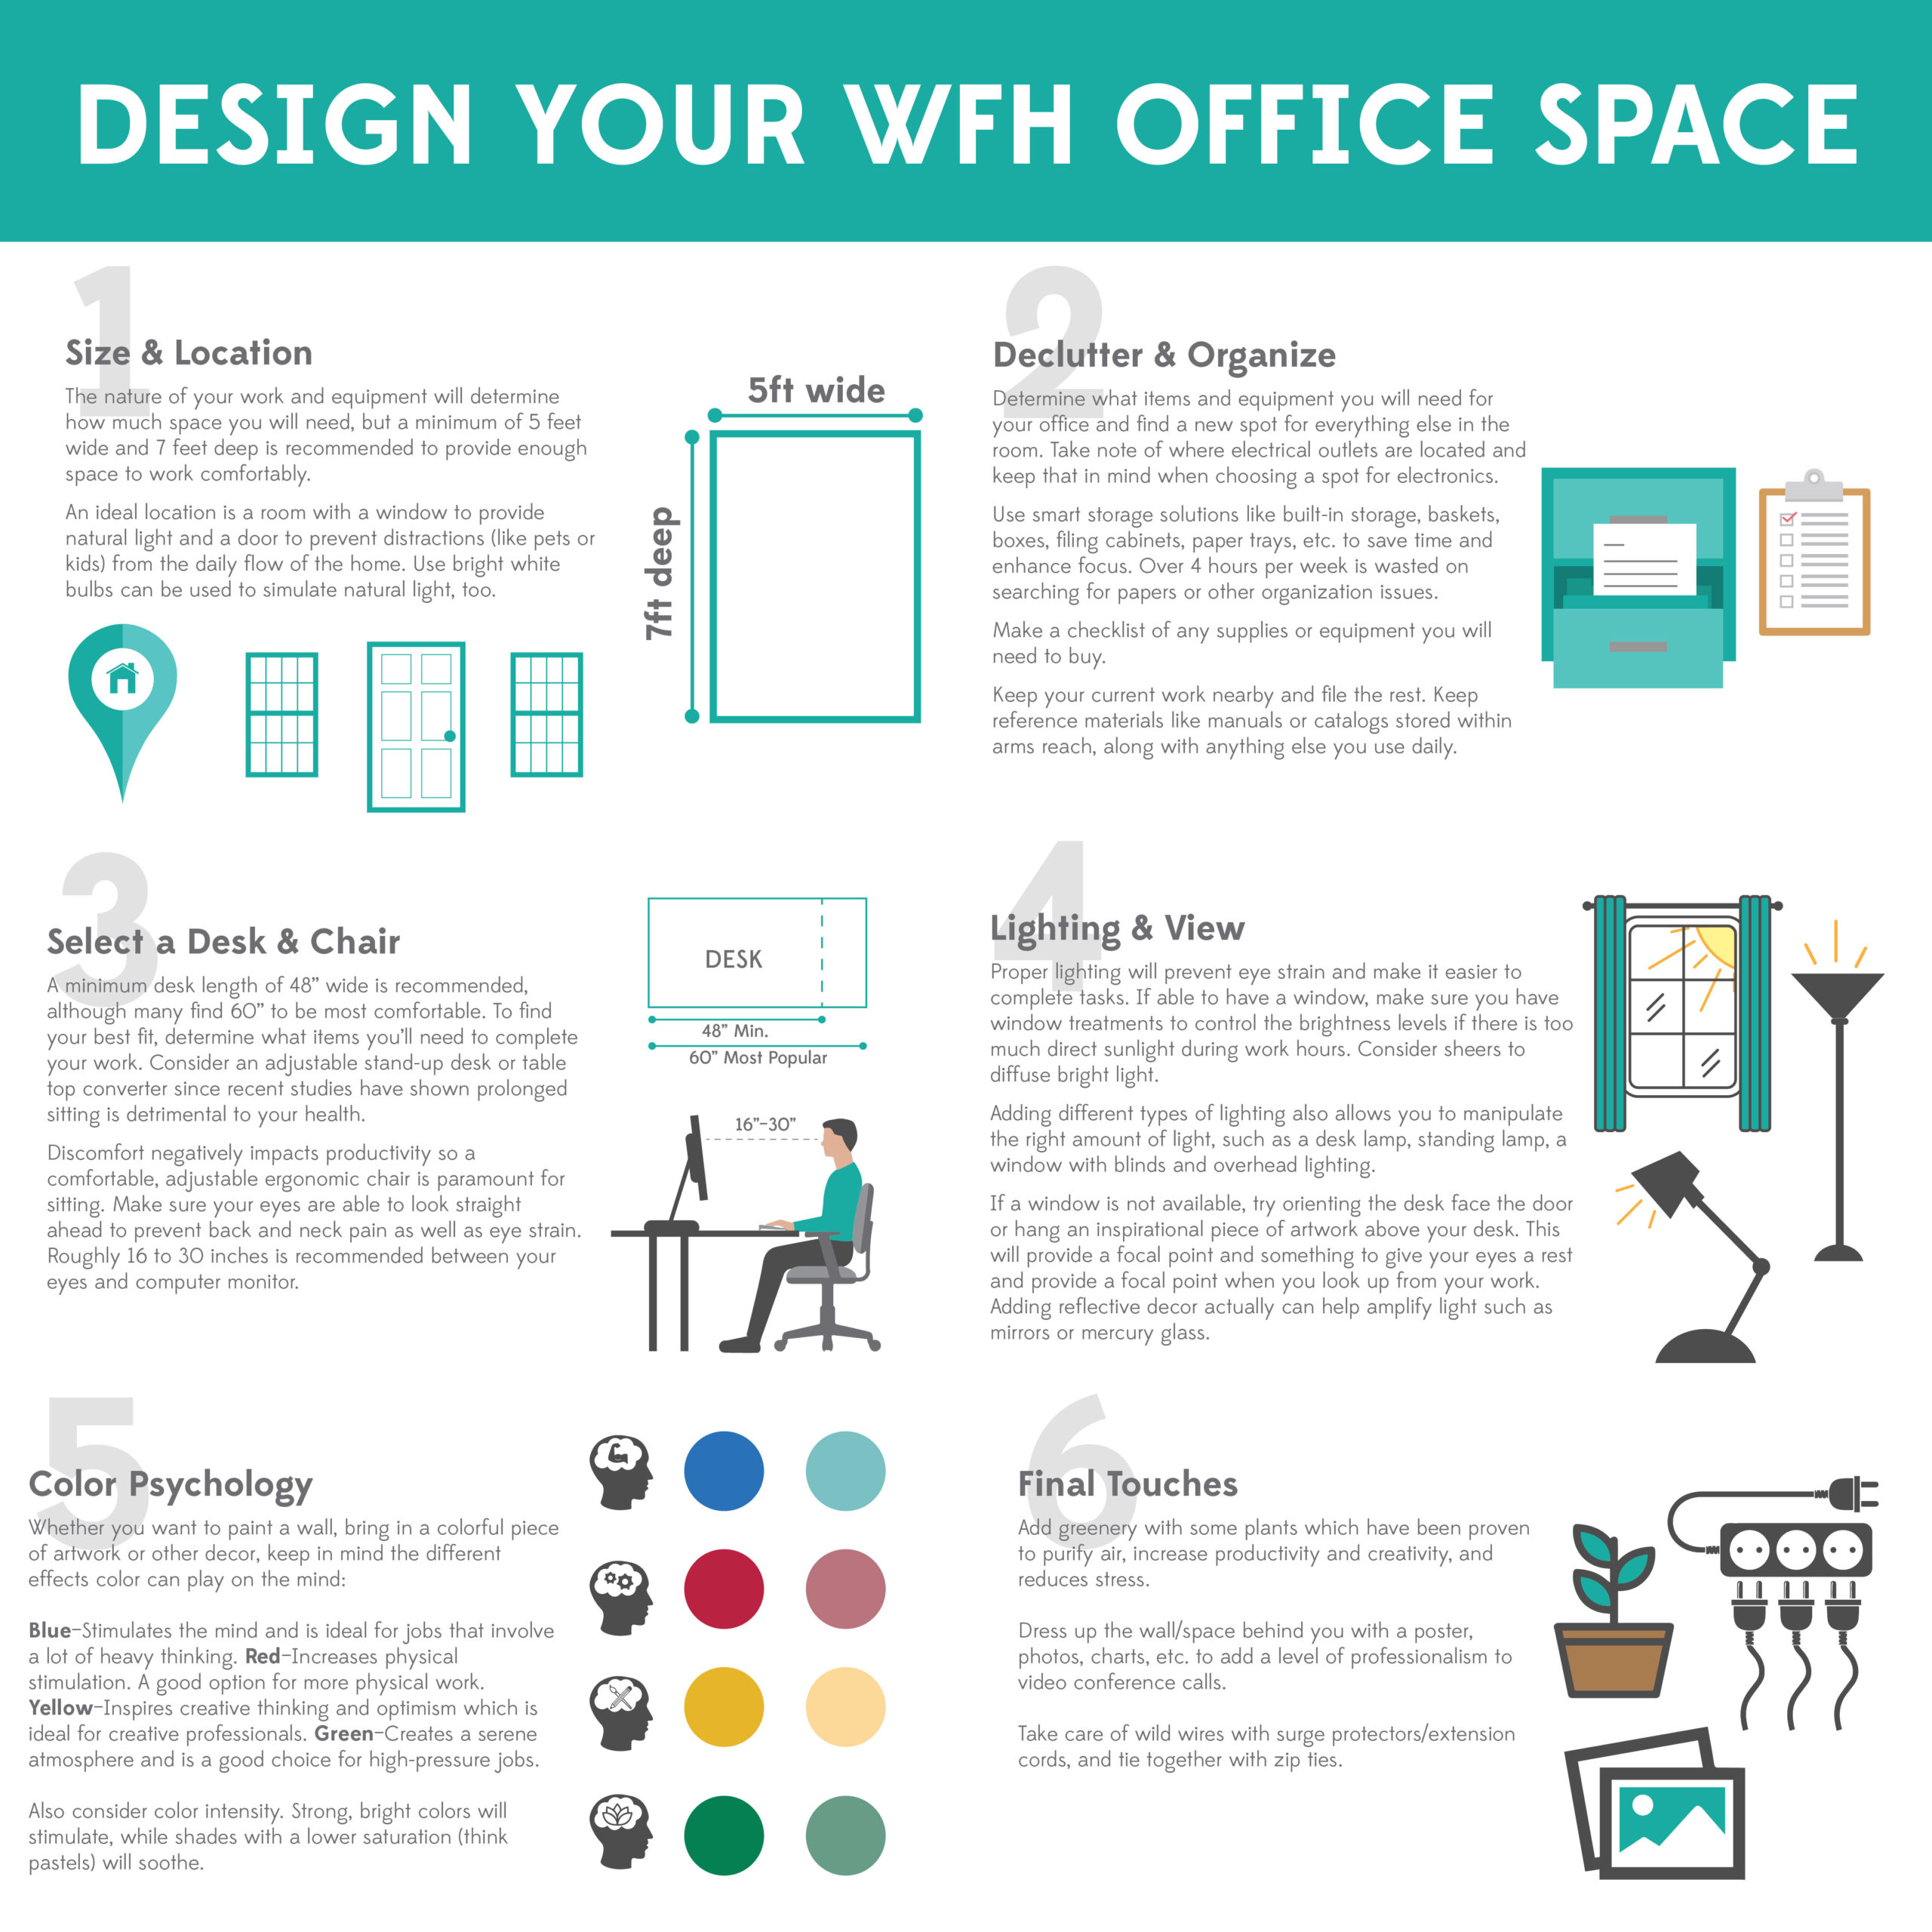 Design your WFH Office Space 